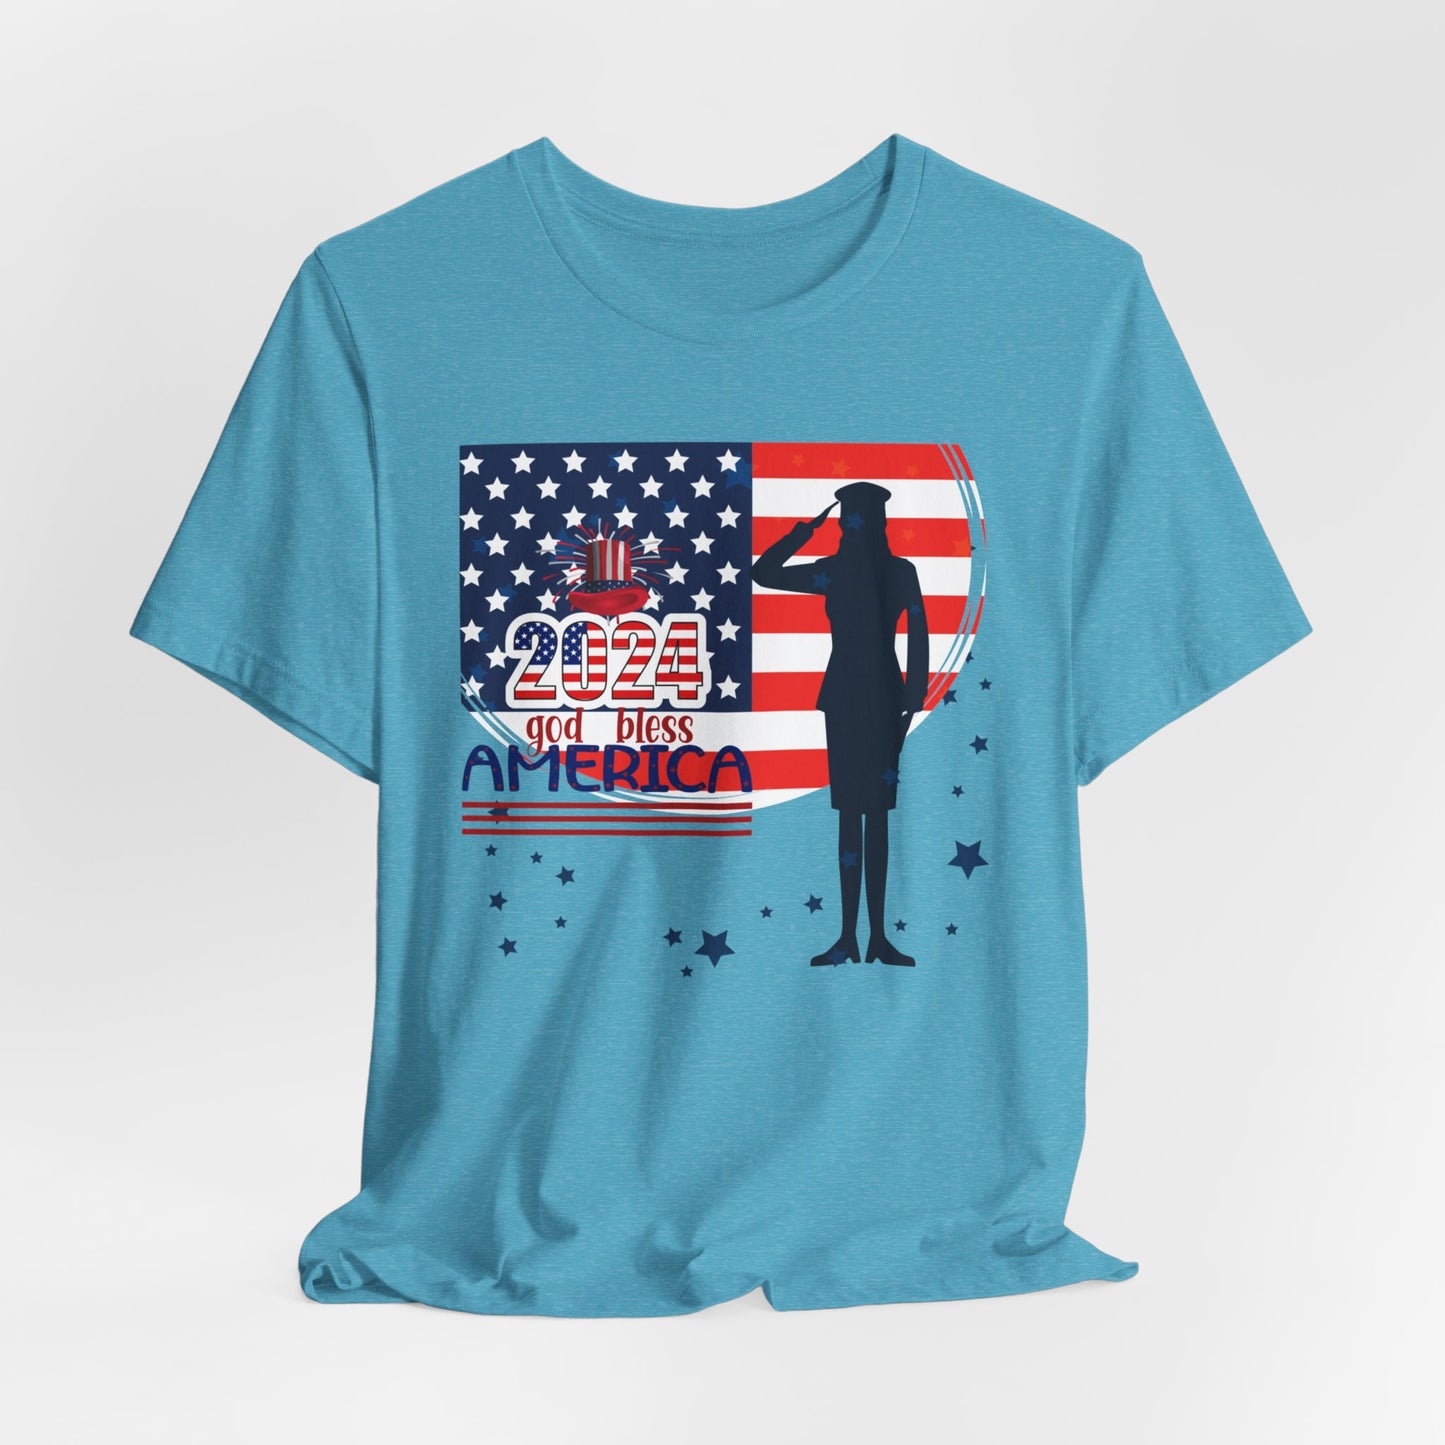 4th of July T-Shirt, God Bless America T-Shirt, Fourth of July unisex jersey short sleeve.